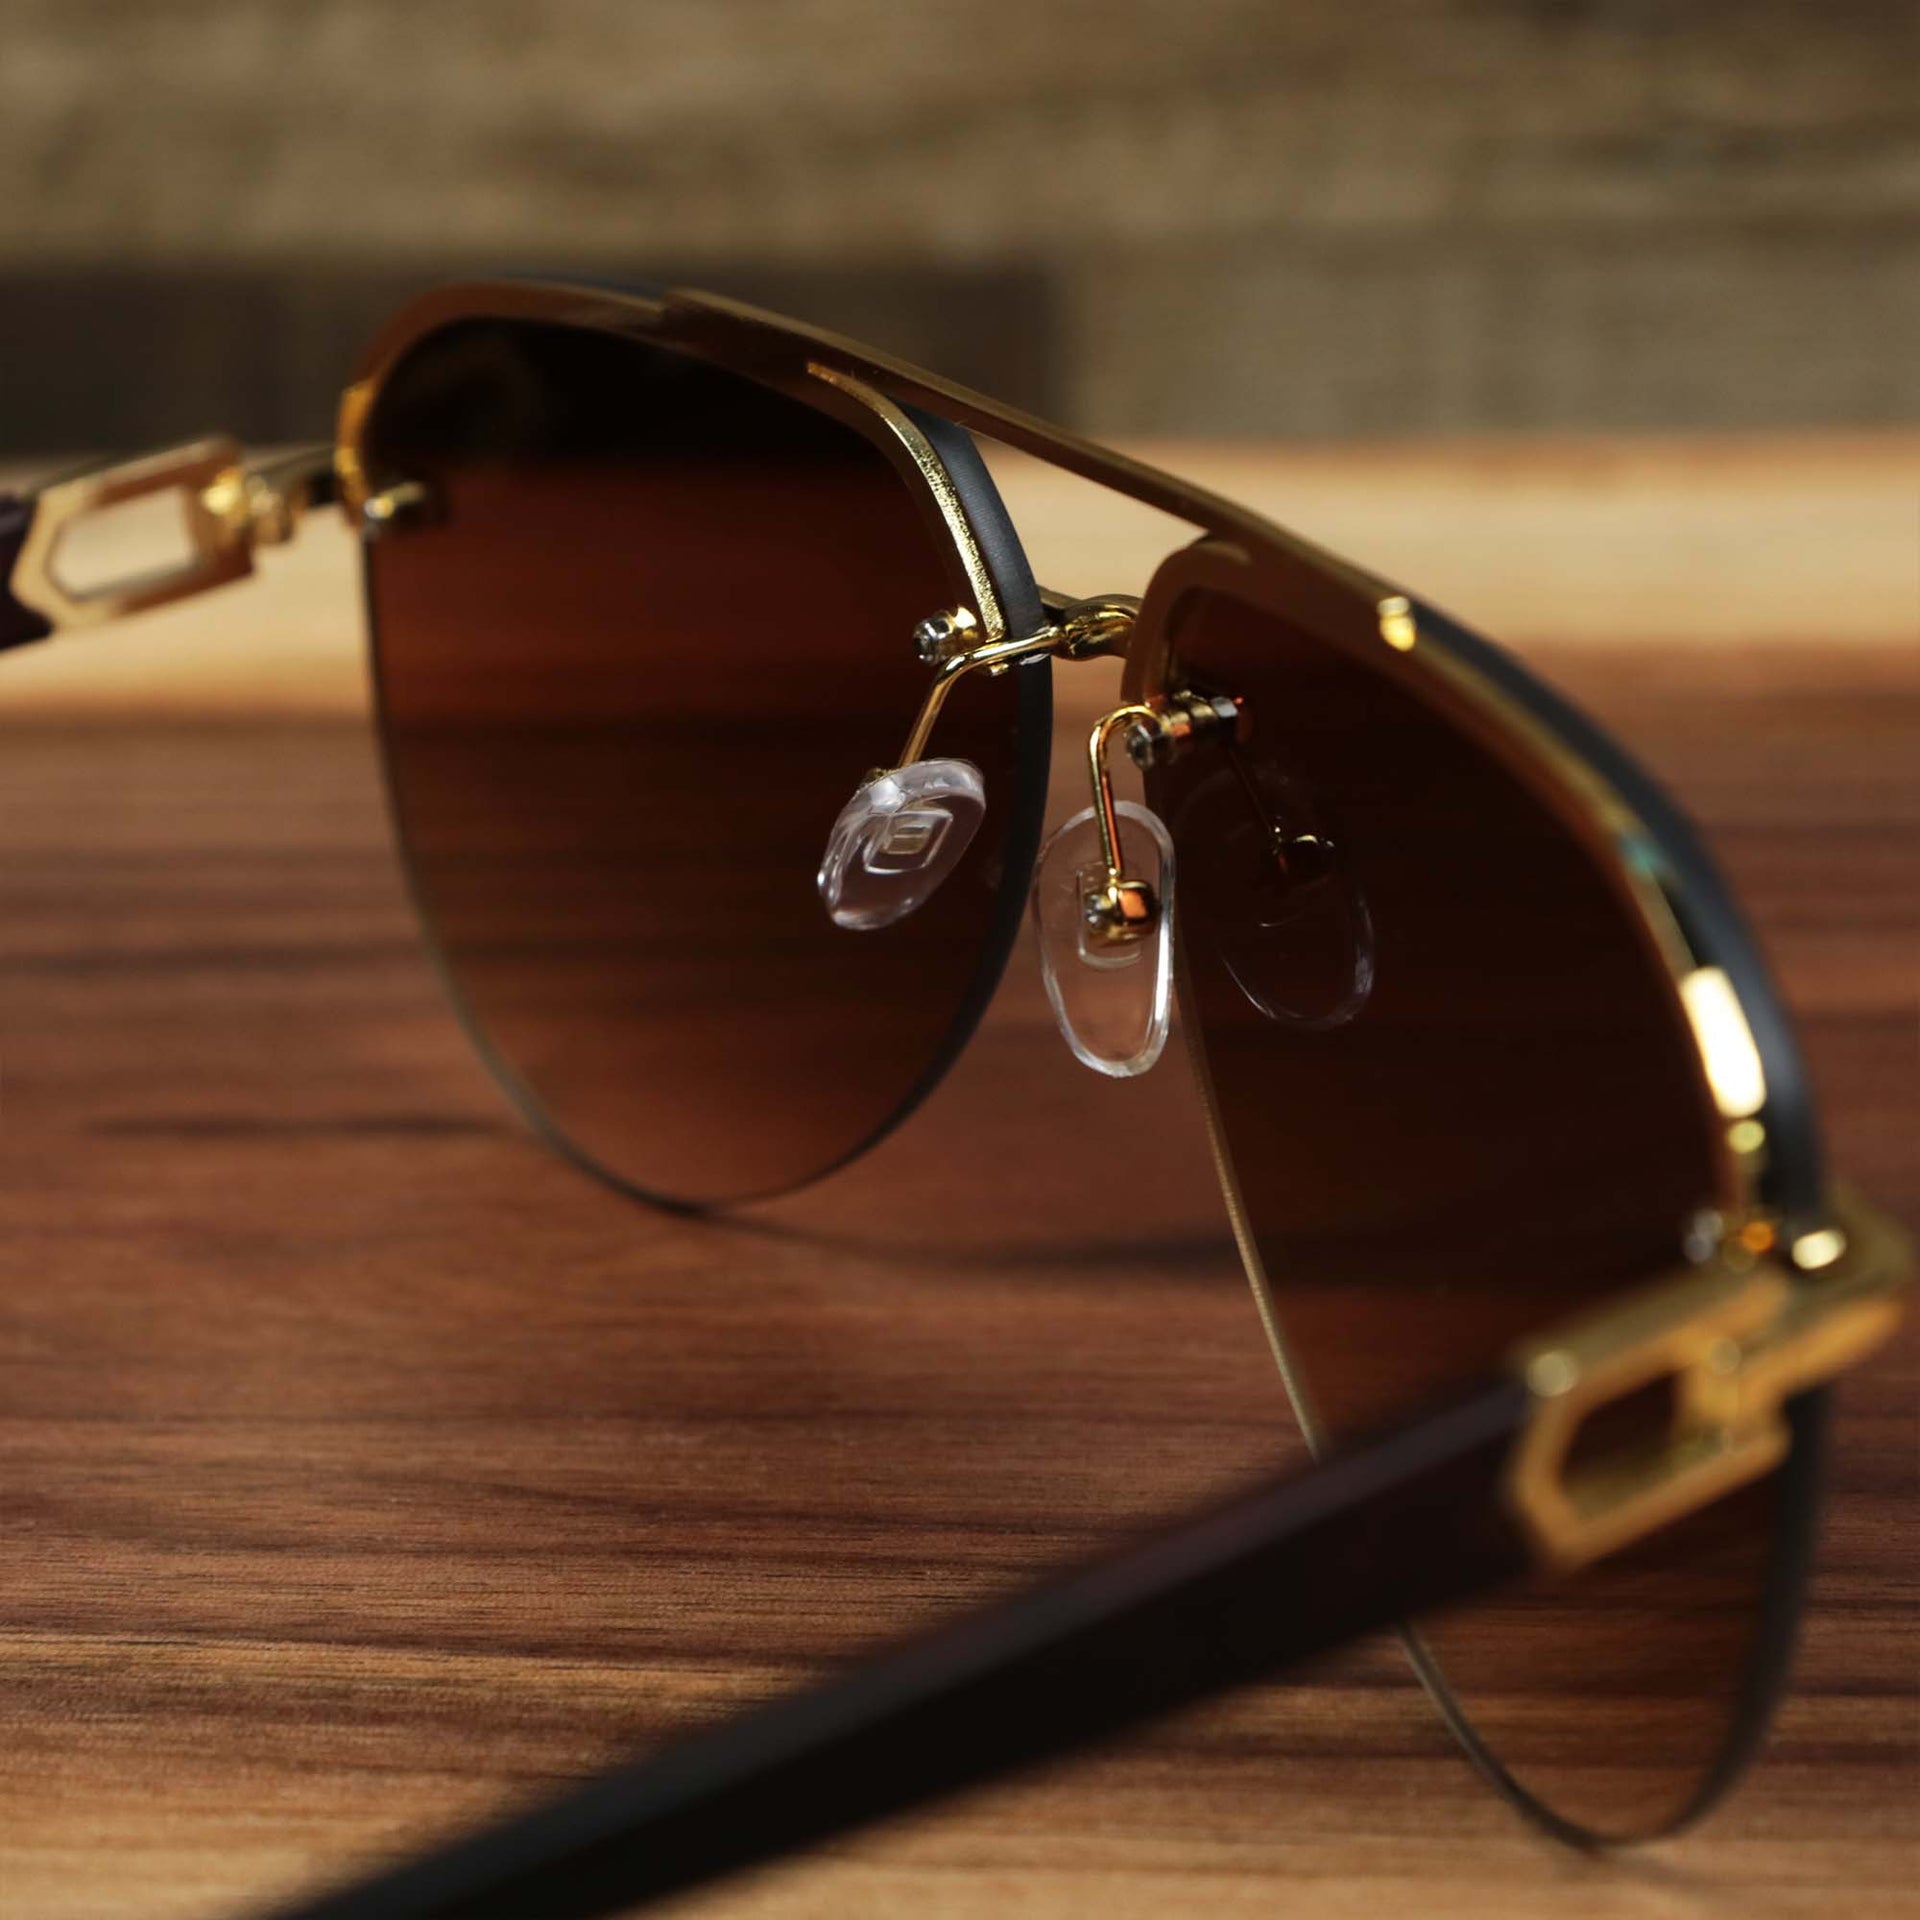 The inside of the Round Aviator Frames Brown Gradient Lens Sunglasses with Gold Frame